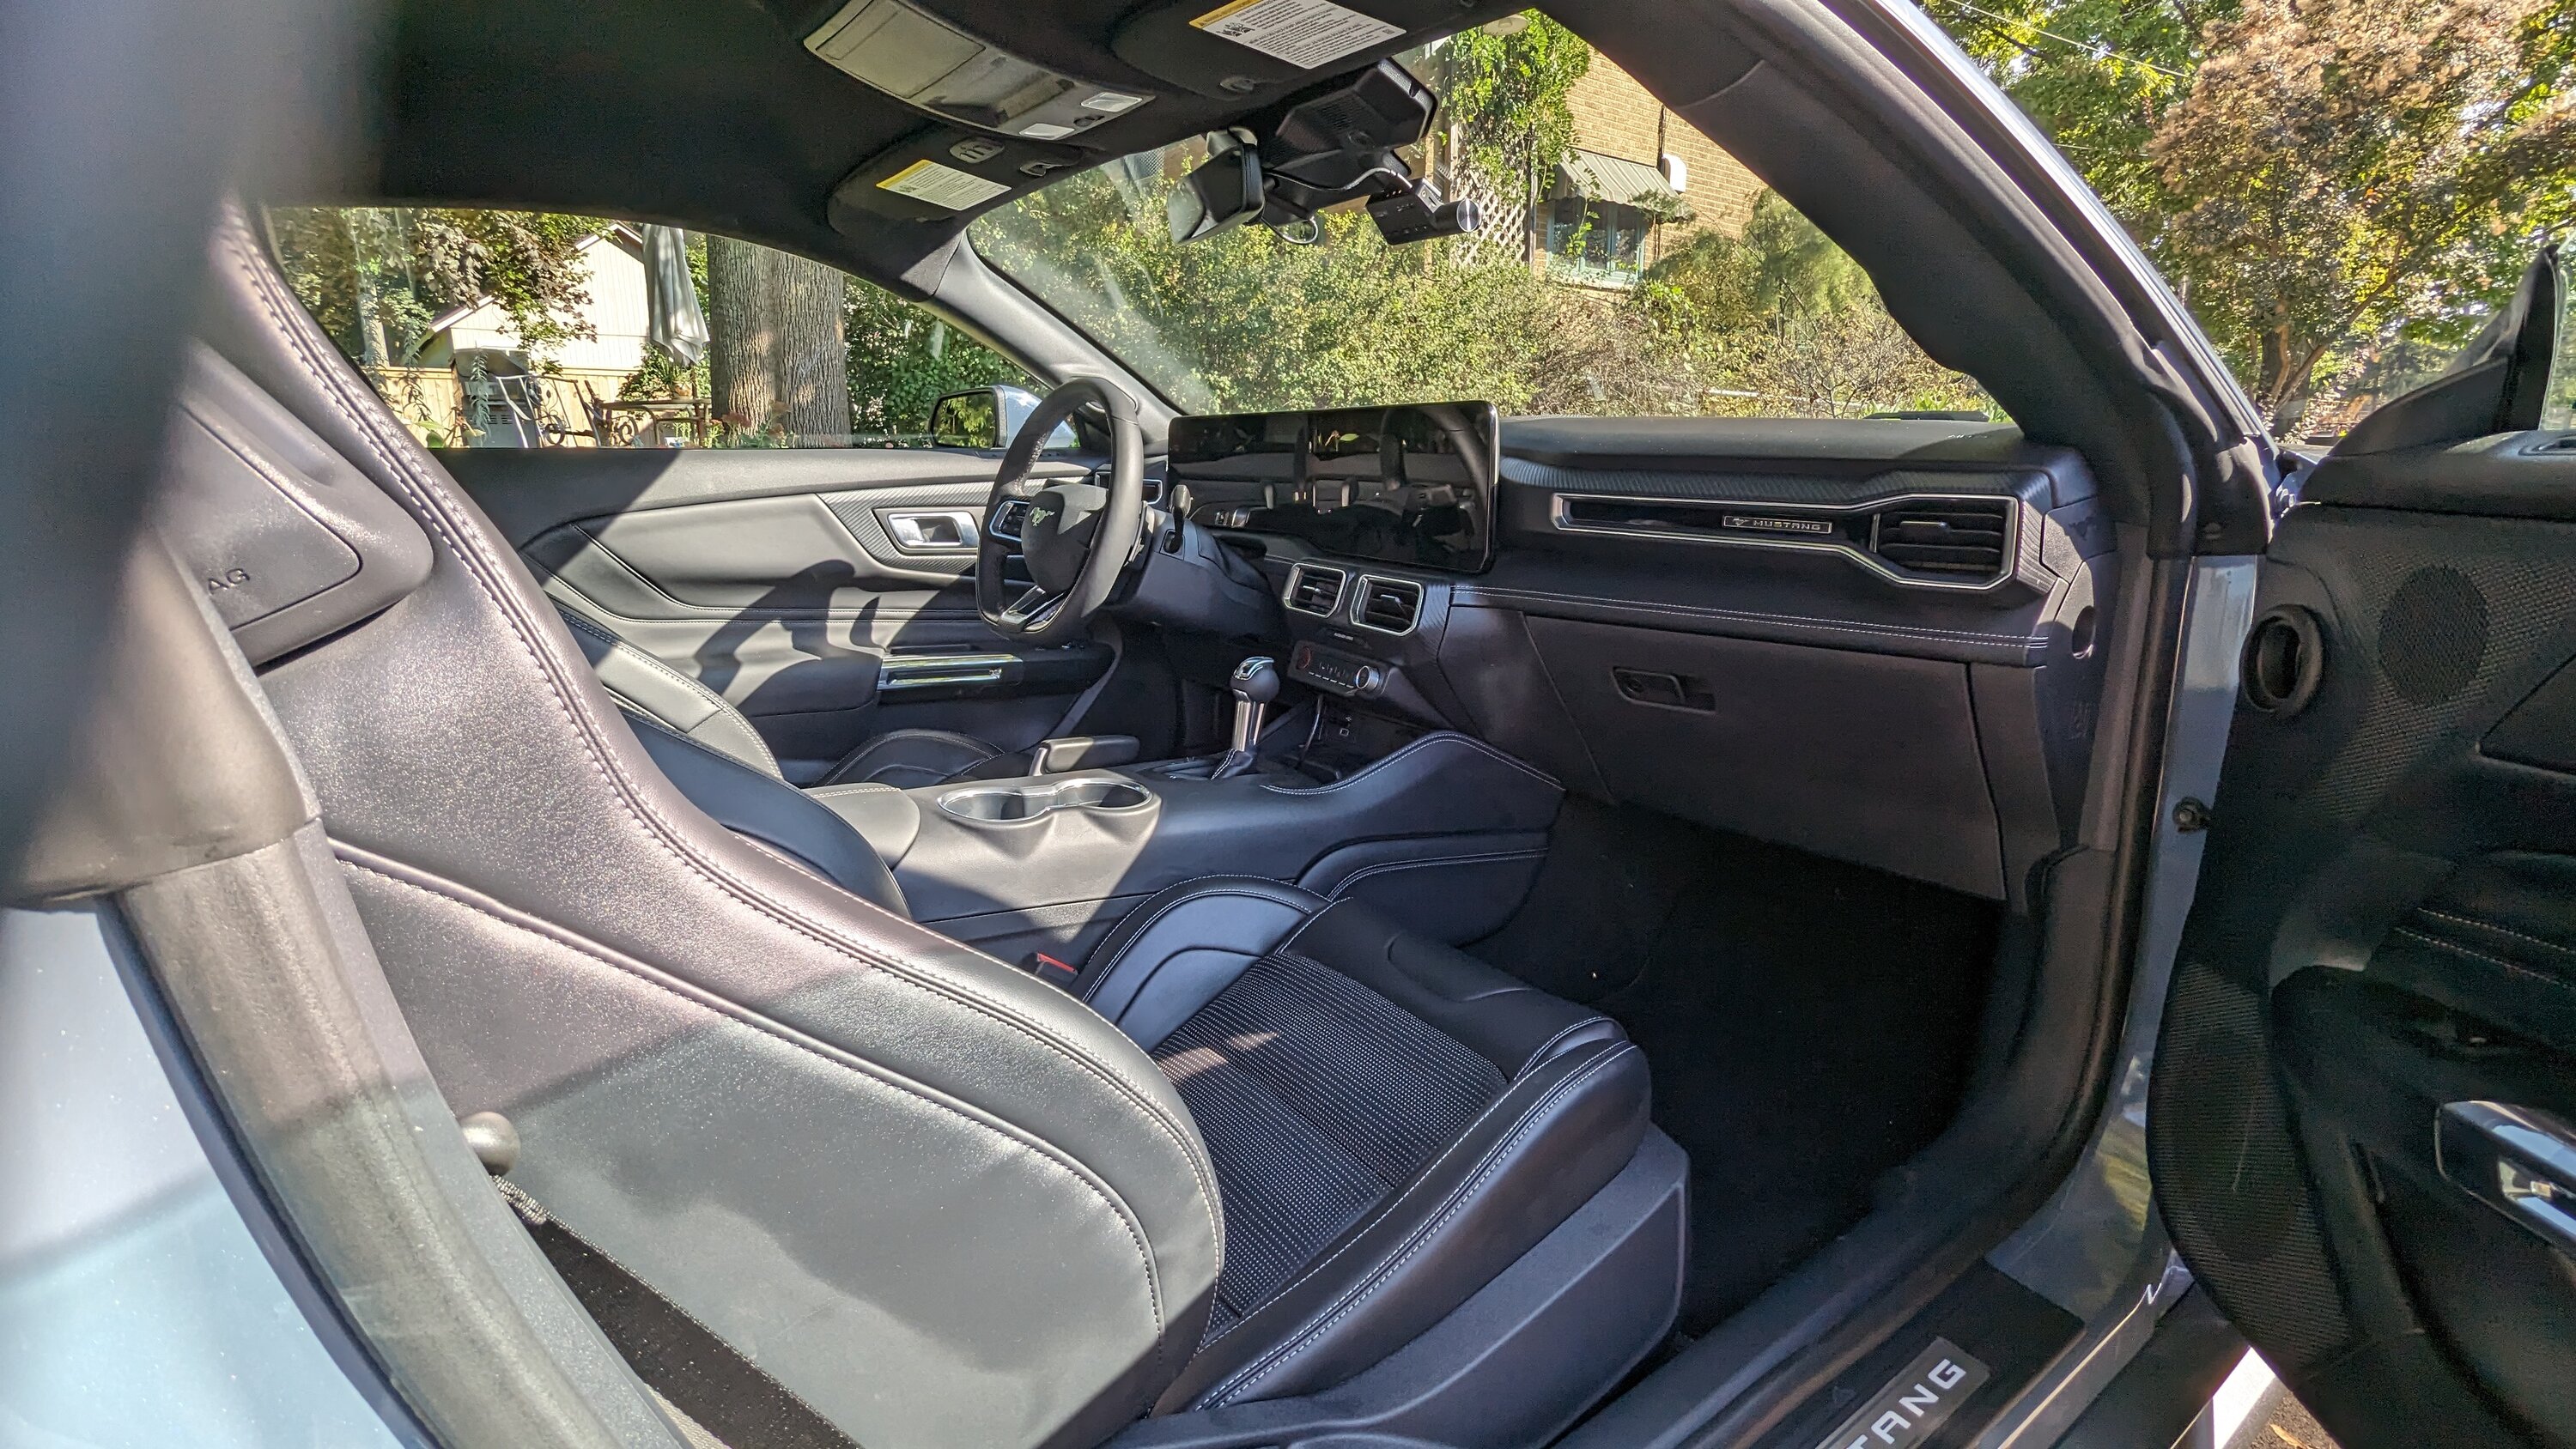 S650 Mustang Let’s post interior photos here! PXL_20231002_201553016